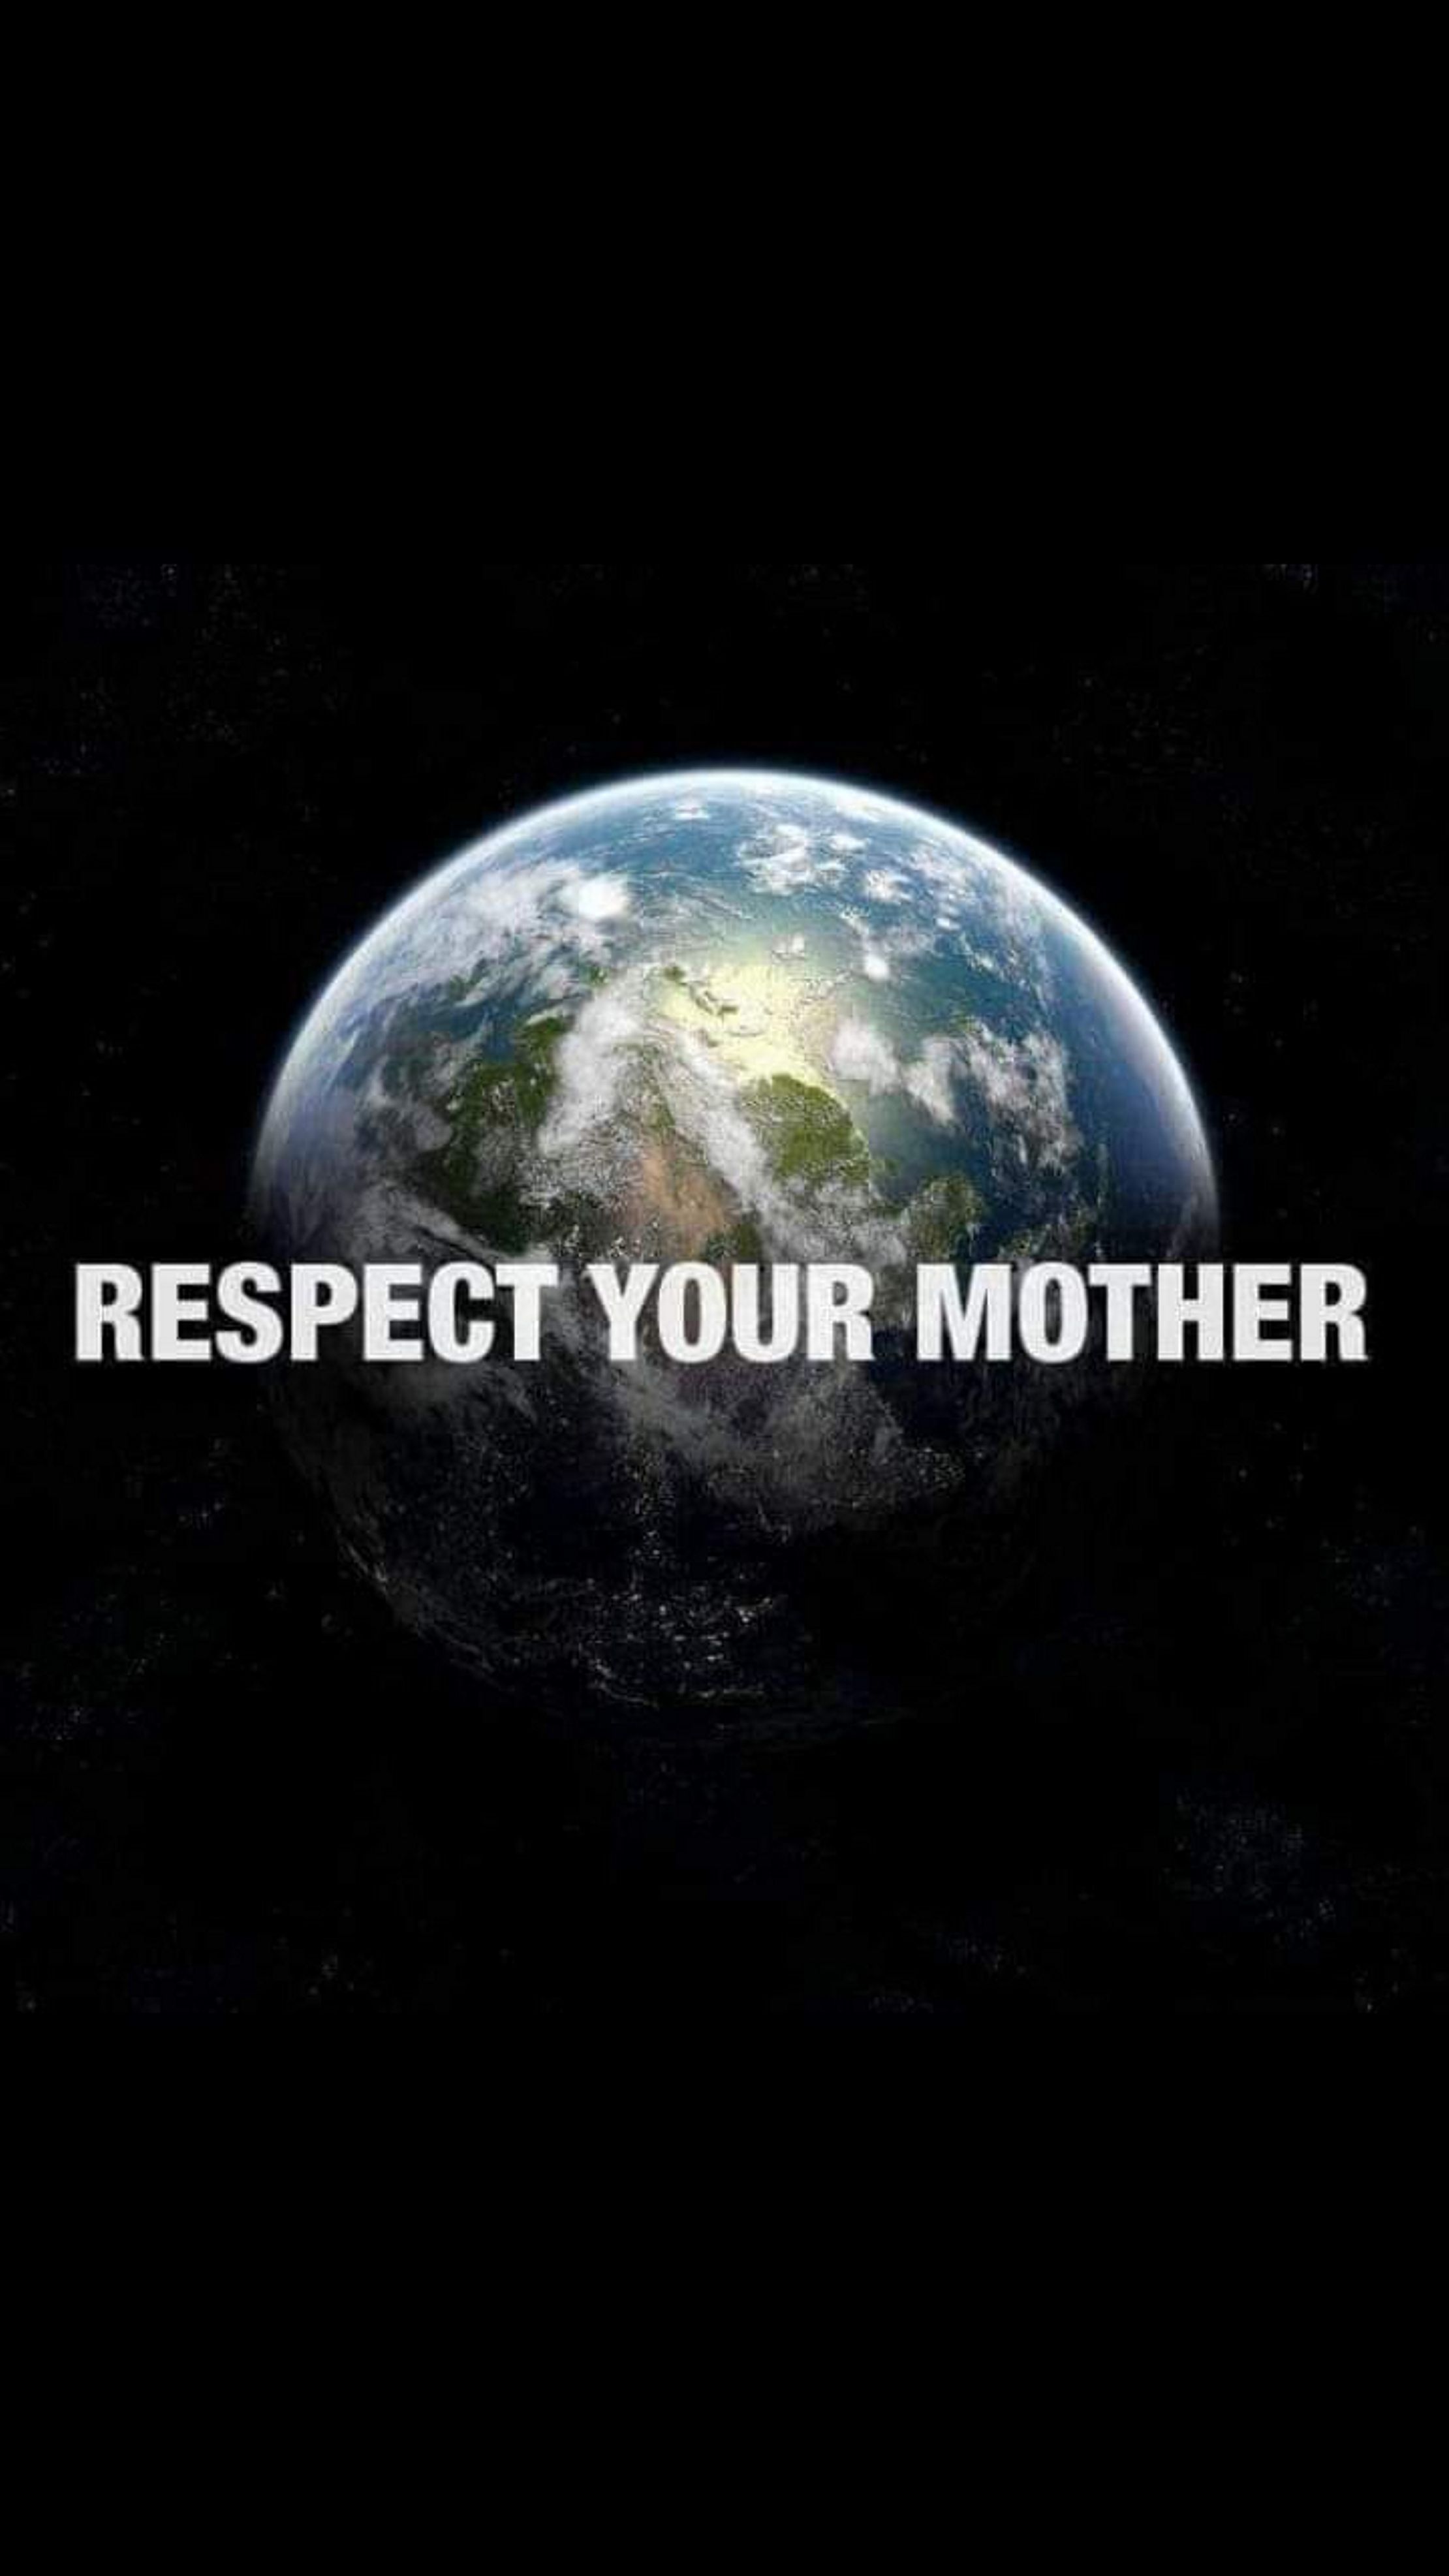 Respect your mother